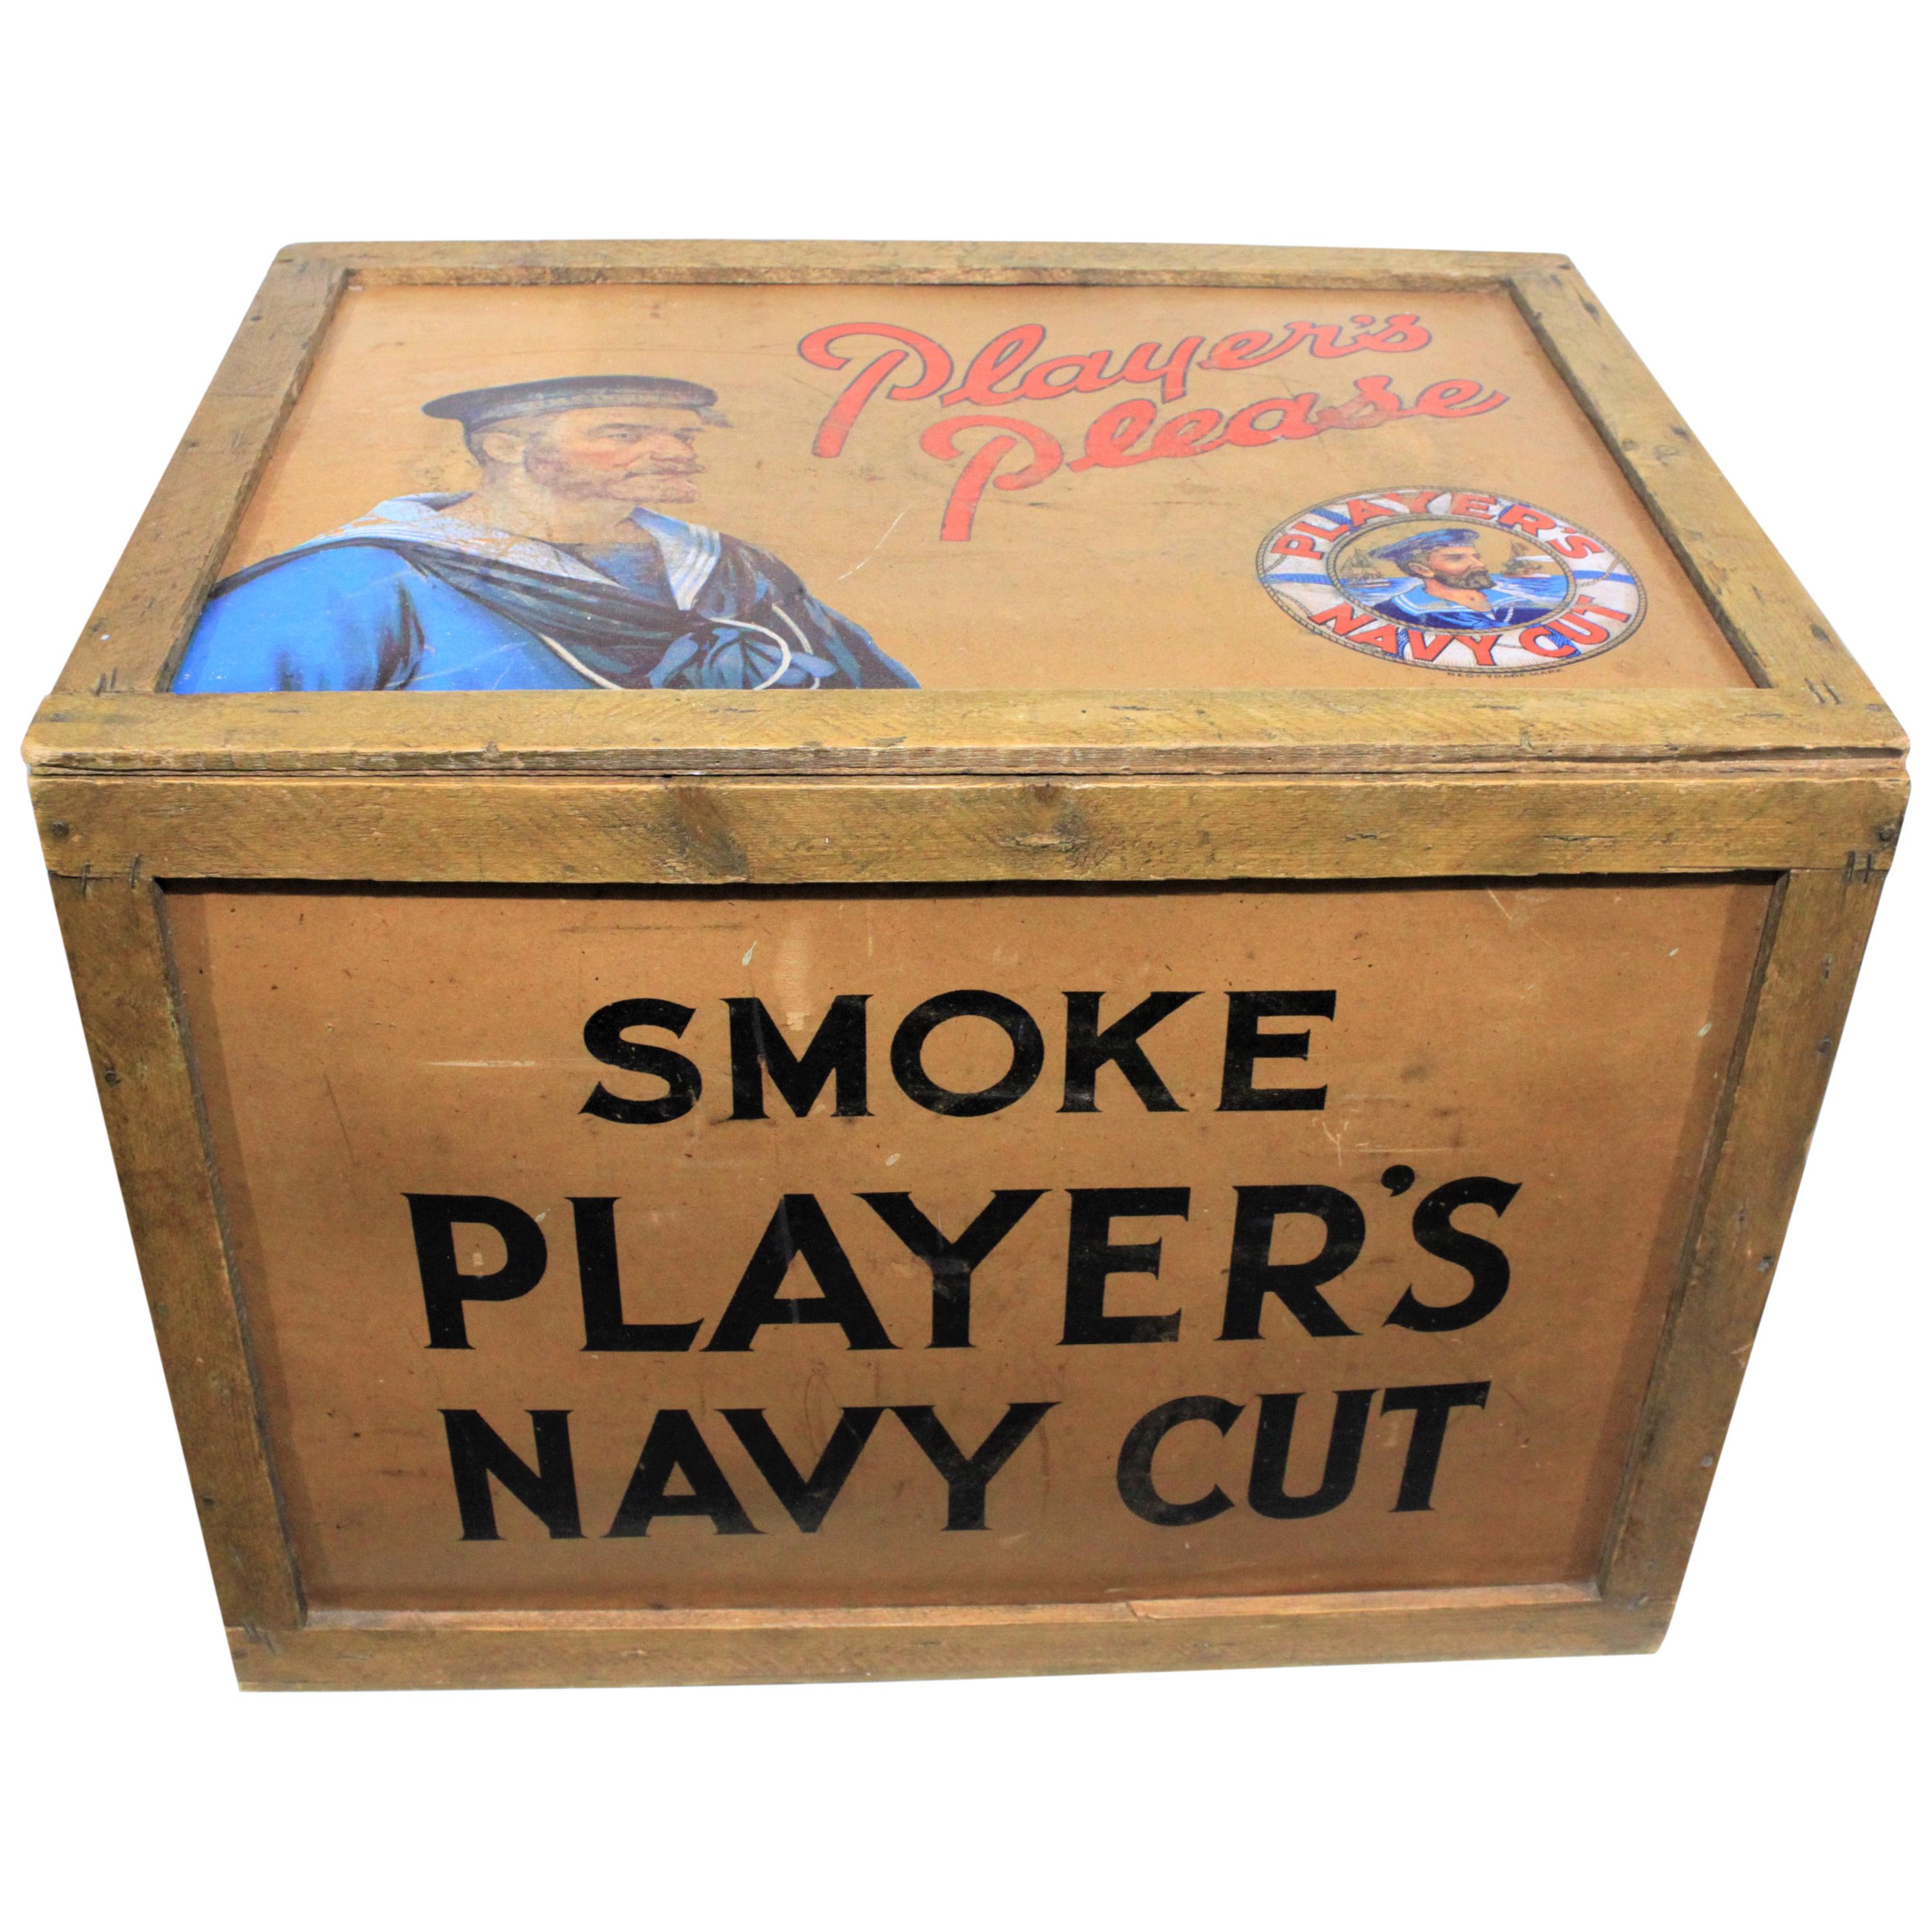 Vintage John Players Navy Cut Cigarette Advertising Shipping Crate or Box For Sale